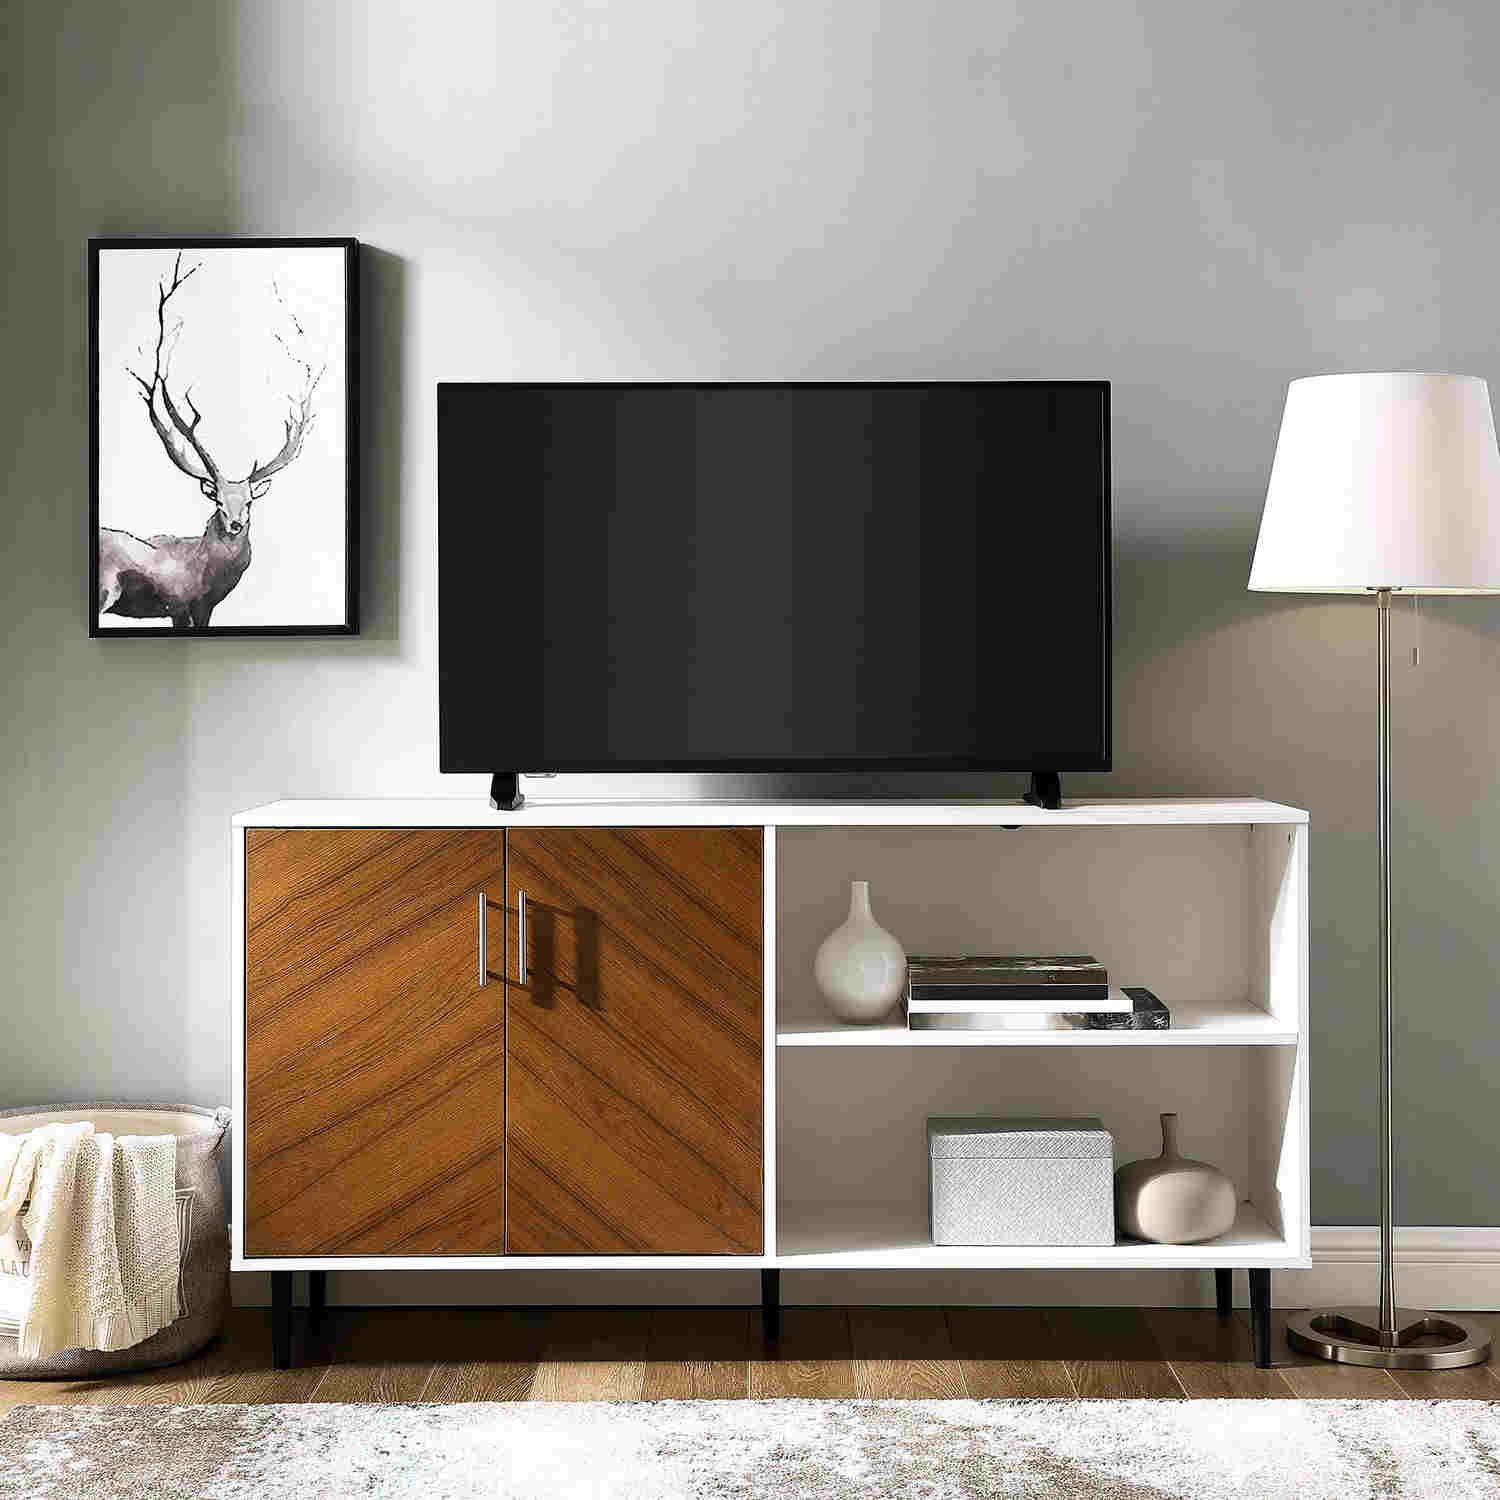 17 Stylish Mid Century Modern Tv Stand Design Ideas Intended For Contemporary Tv Stands (View 6 of 15)